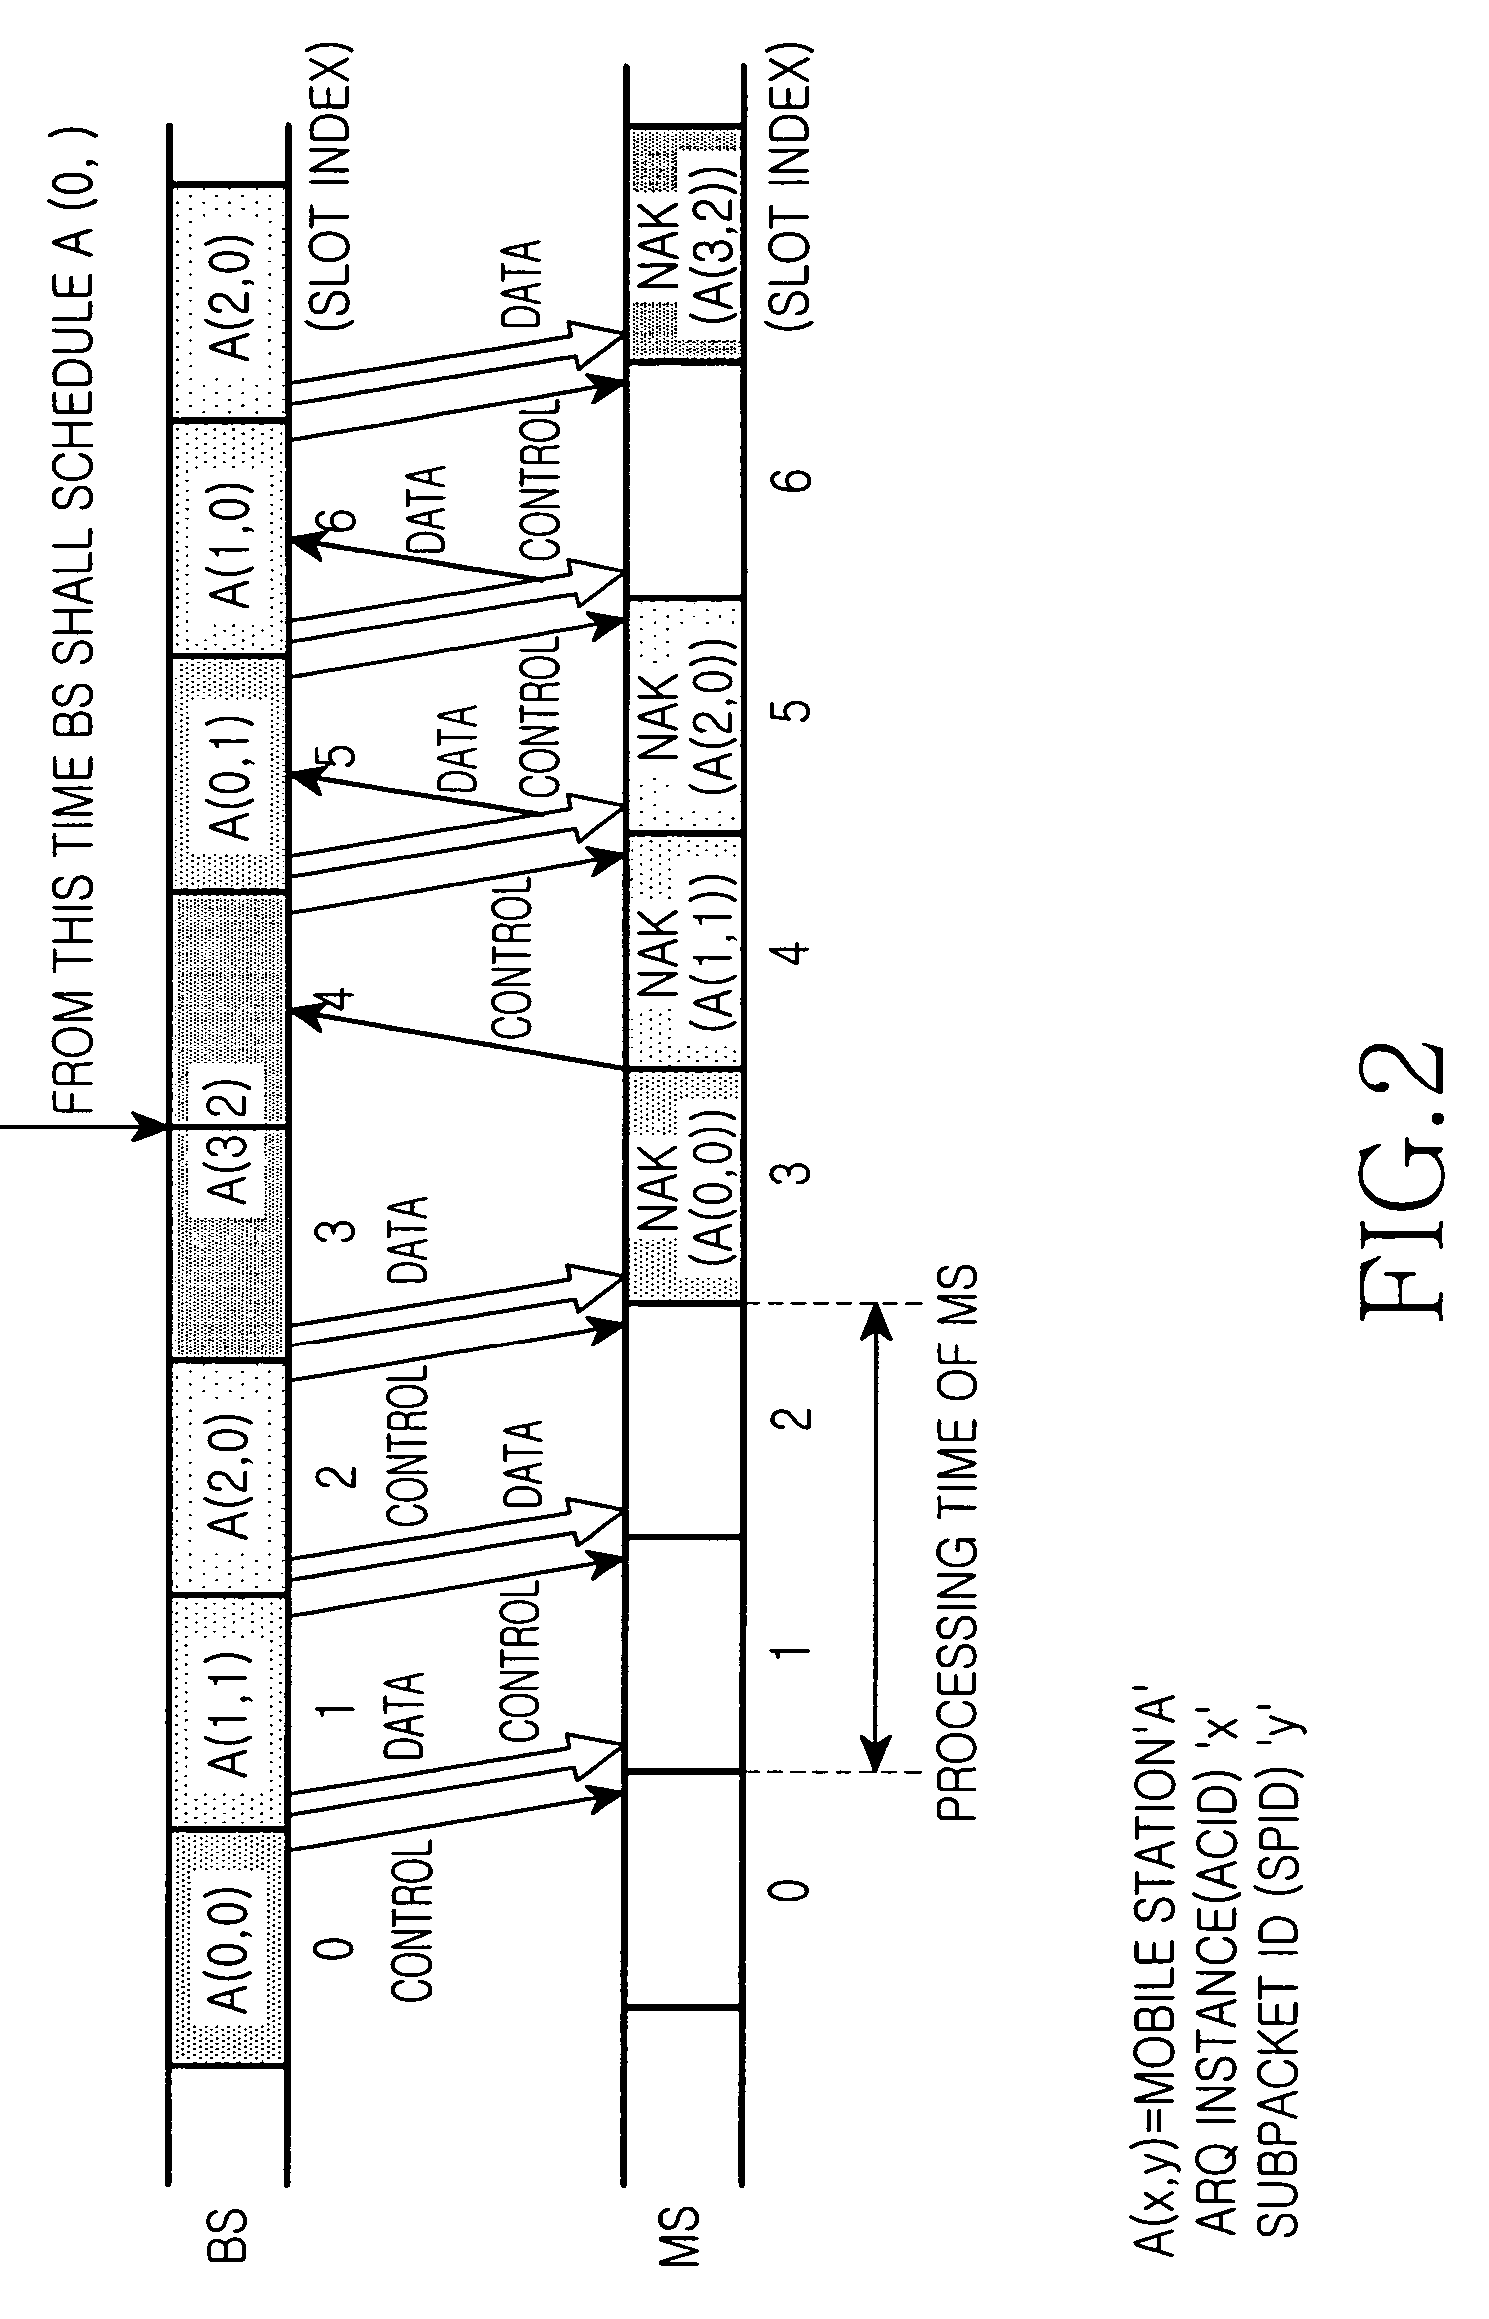 Method for controlling turbo decoding time in a high-speed packet data communication system